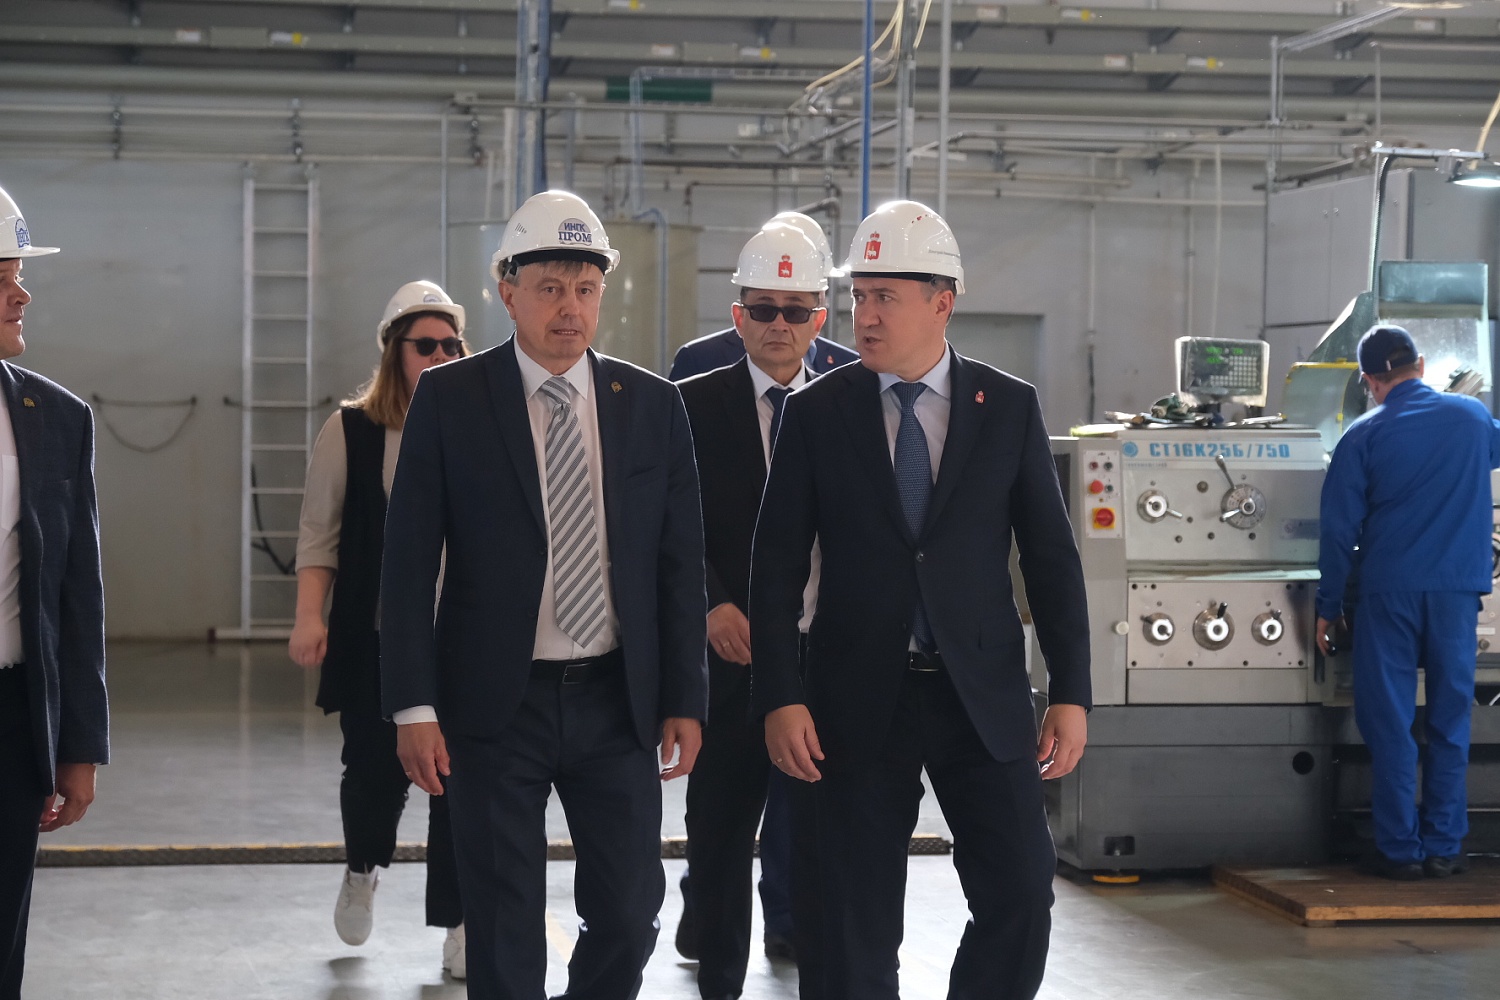 During his Working visit, the Governor of Perm Krai, Dmitry Makhonin, Has Visited a New Production Shop of INGC Company in Perm